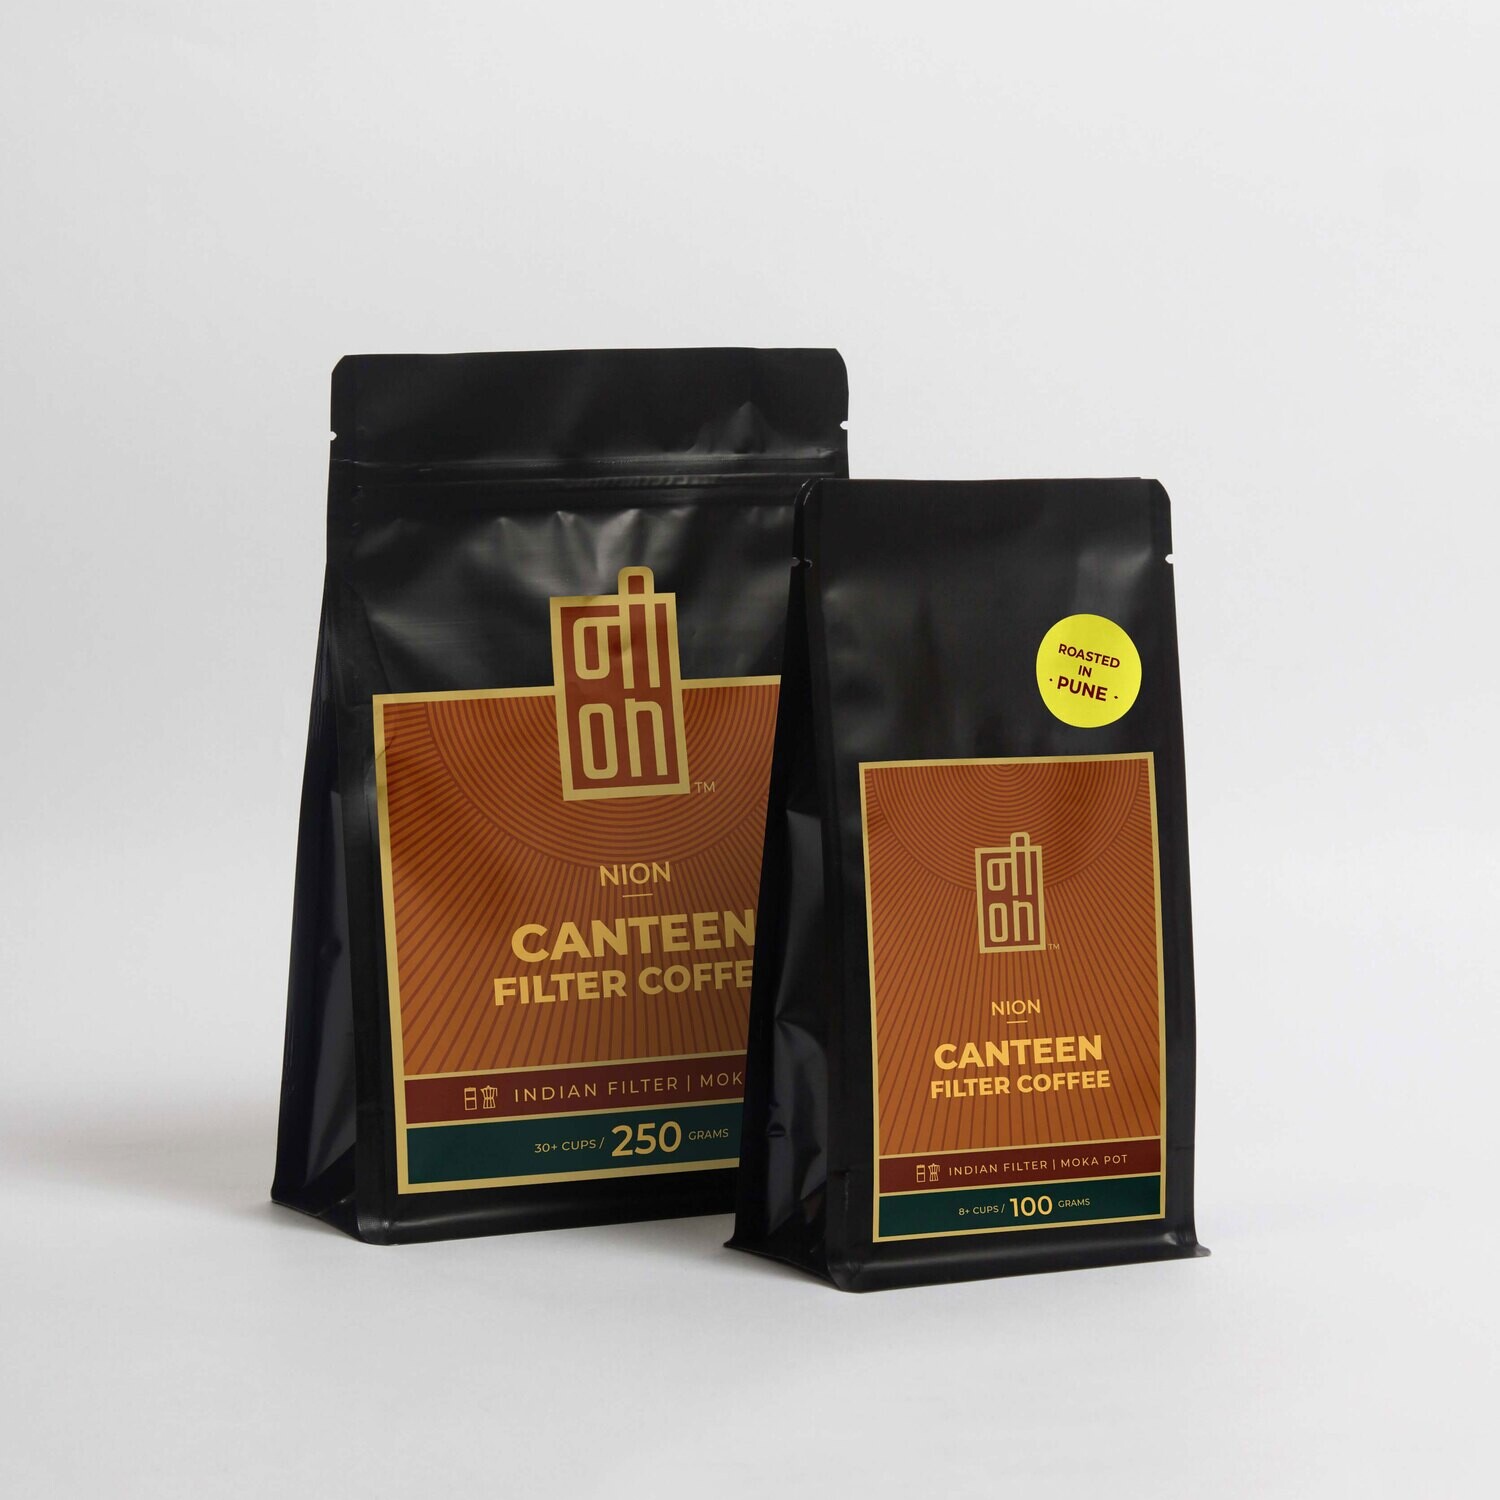 Canteen Filter Coffee